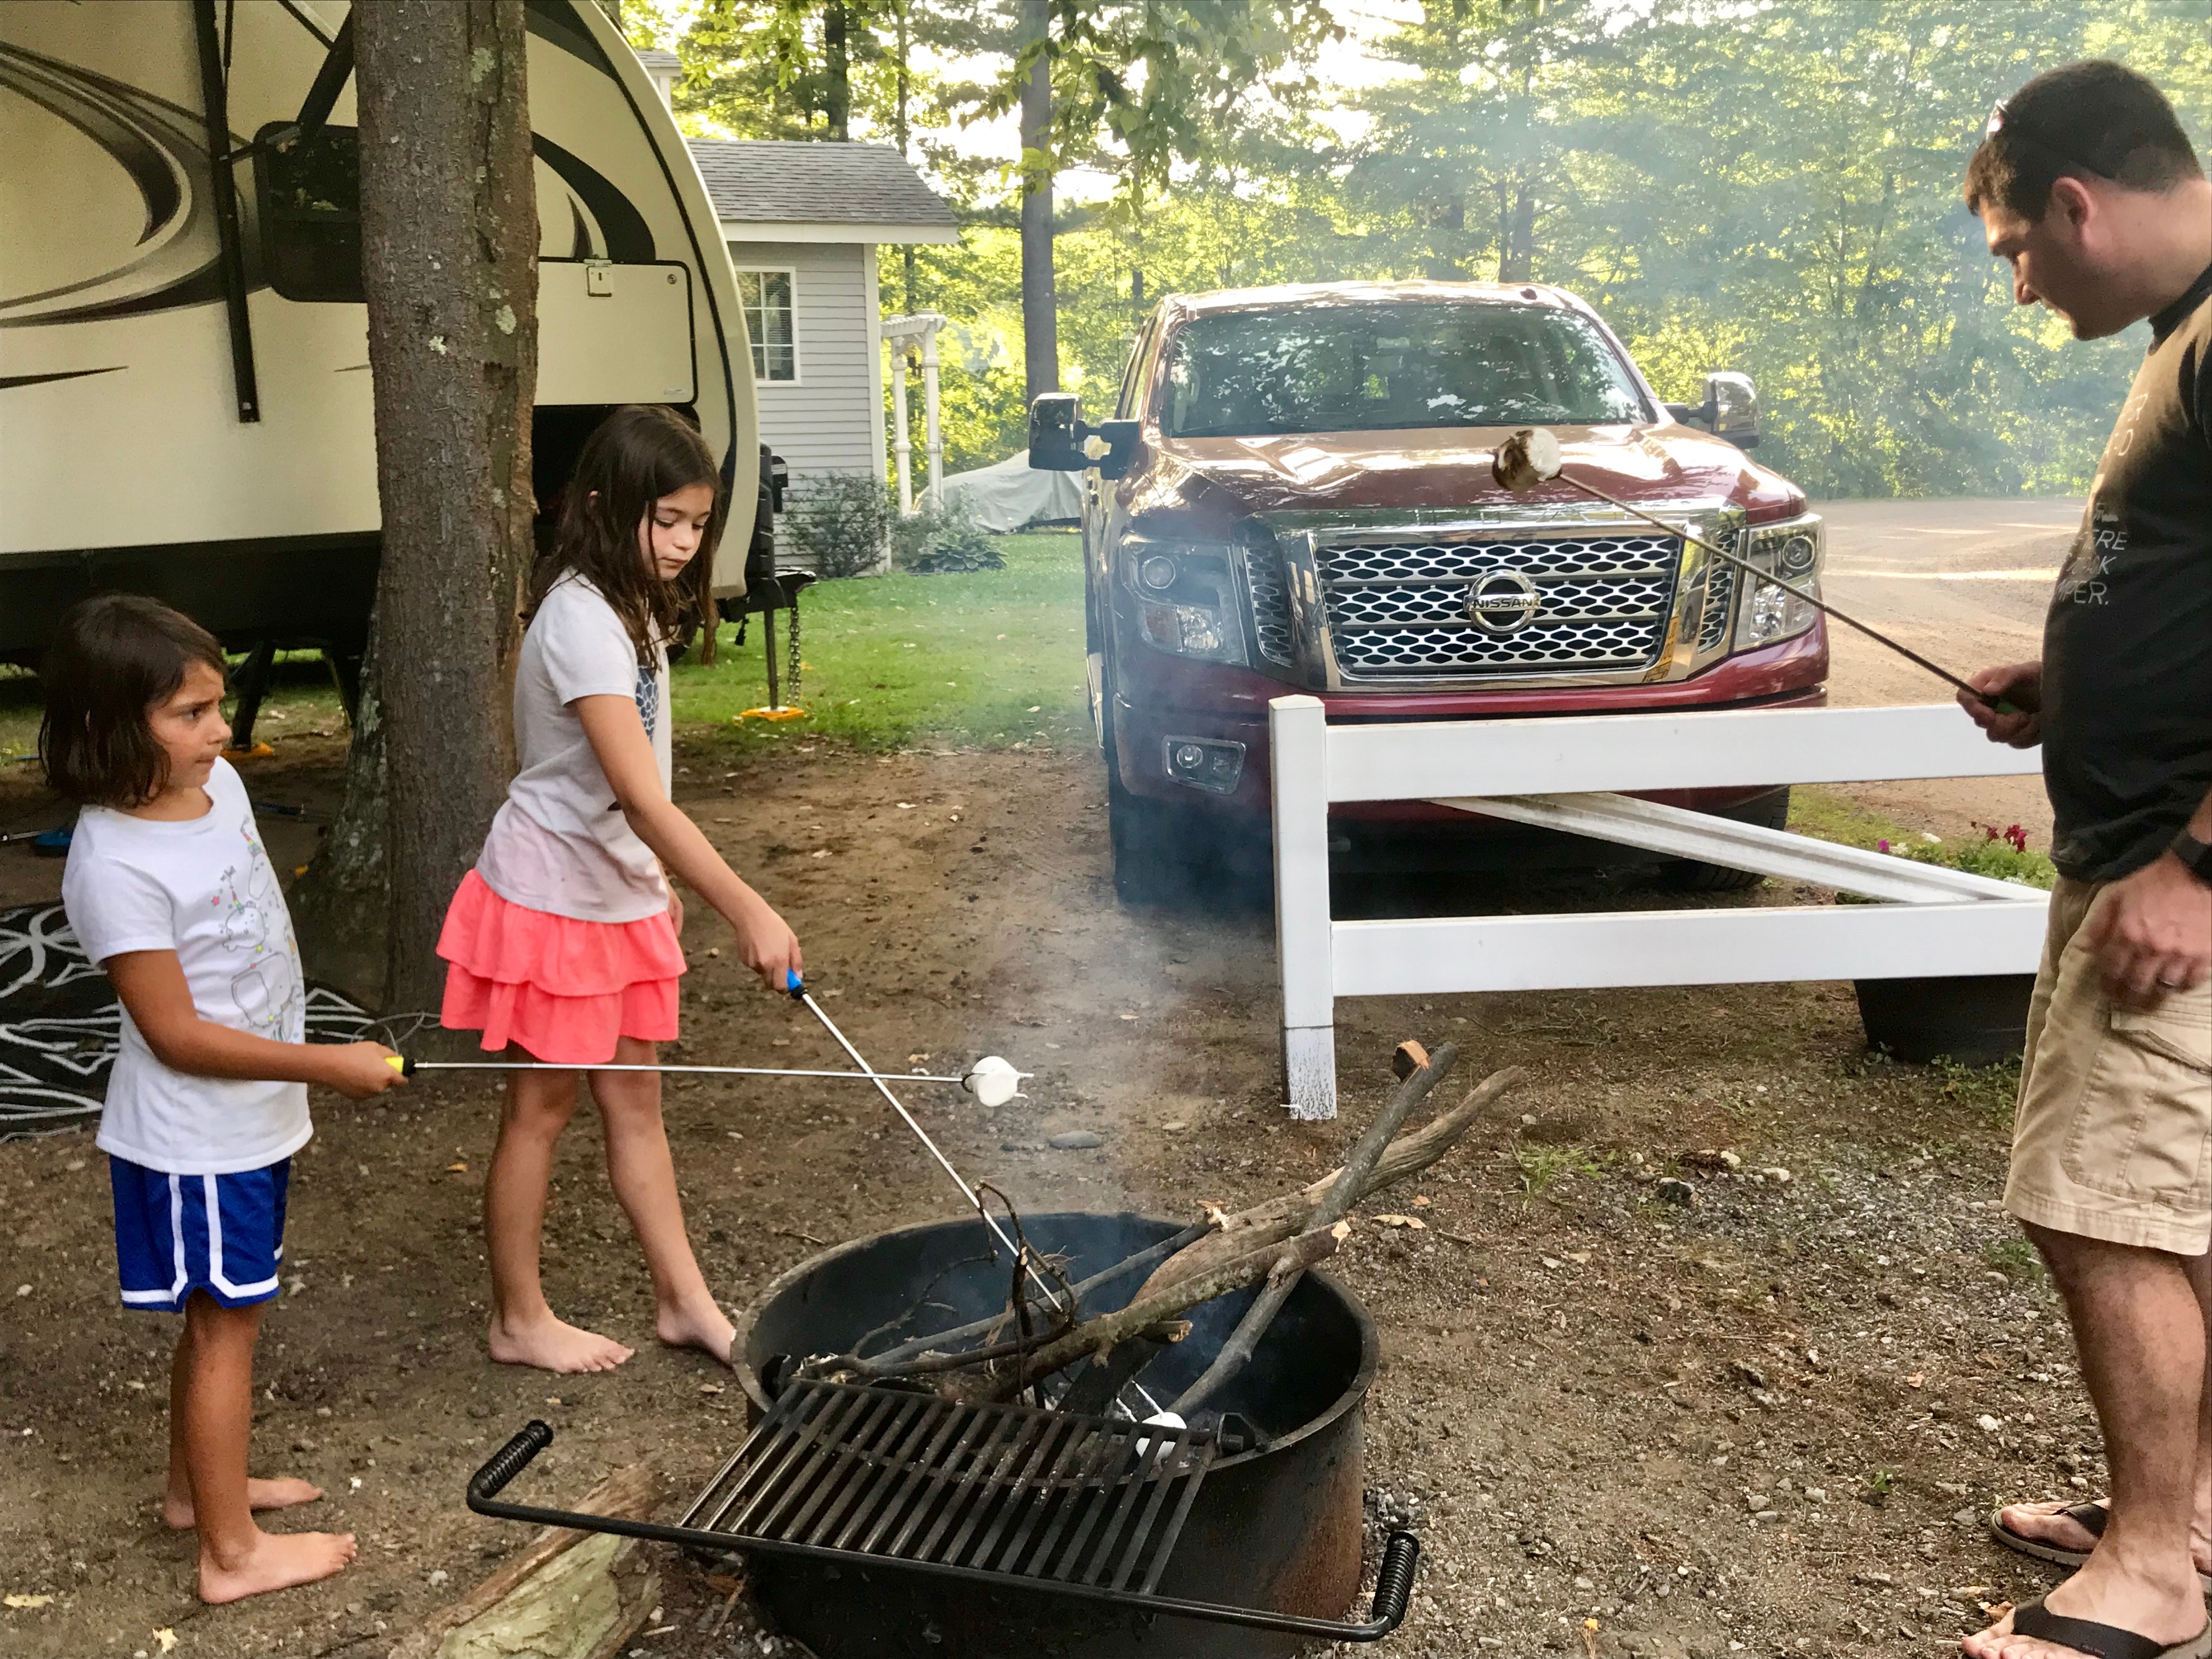 Campers Inn RV COO Ben Hirsch roasts marshmallows with his daughters